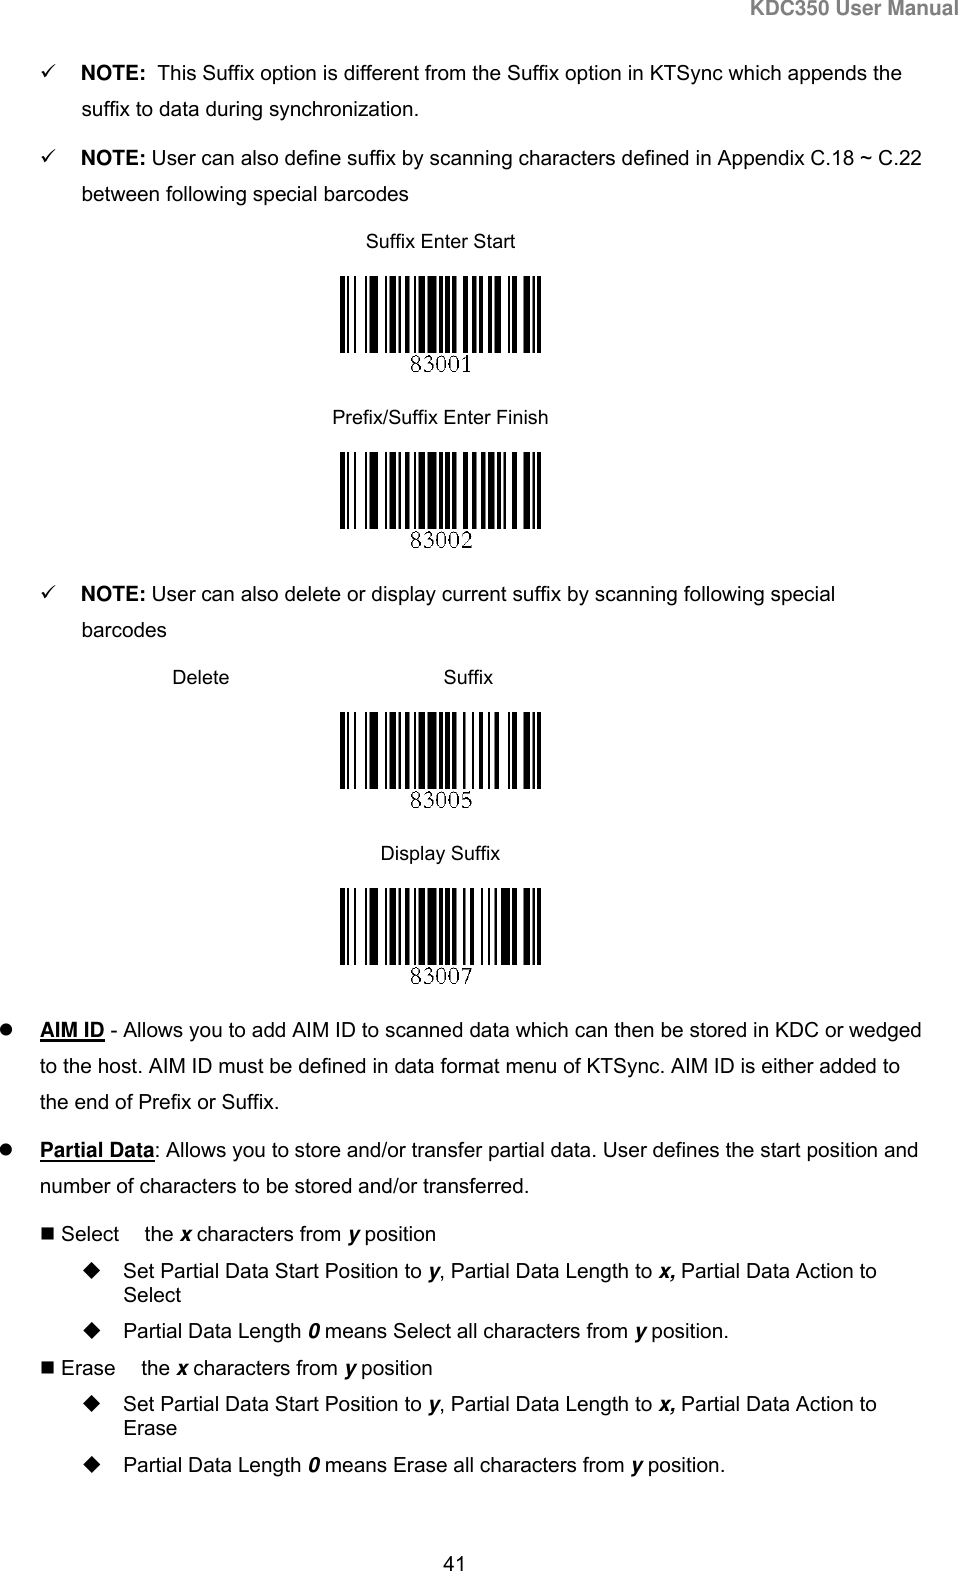 KDC350 User Manual  41   NOTE:  This Suffix option is different from the Suffix option in KTSync which appends the suffix to data during synchronization.    NOTE: User can also define suffix by scanning characters defined in Appendix C.18 ~ C.22 between following special barcodes Suffix Enter Start  Prefix/Suffix Enter Finish                                                                               NOTE: User can also delete or display current suffix by scanning following special barcodes     Delete  Suffix  Display Suffix   AIM ID - Allows you to add AIM ID to scanned data which can then be stored in KDC or wedged to the host. AIM ID must be defined in data format menu of KTSync. AIM ID is either added to the end of Prefix or Suffix.  Partial Data: Allows you to store and/or transfer partial data. User defines the start position and number of characters to be stored and/or transferred.  Select the x characters from y position   Set Partial Data Start Position to y, Partial Data Length to x, Partial Data Action to Select   Partial Data Length 0 means Select all characters from y position.  Erase the x characters from y position   Set Partial Data Start Position to y, Partial Data Length to x, Partial Data Action to Erase   Partial Data Length 0 means Erase all characters from y position.  